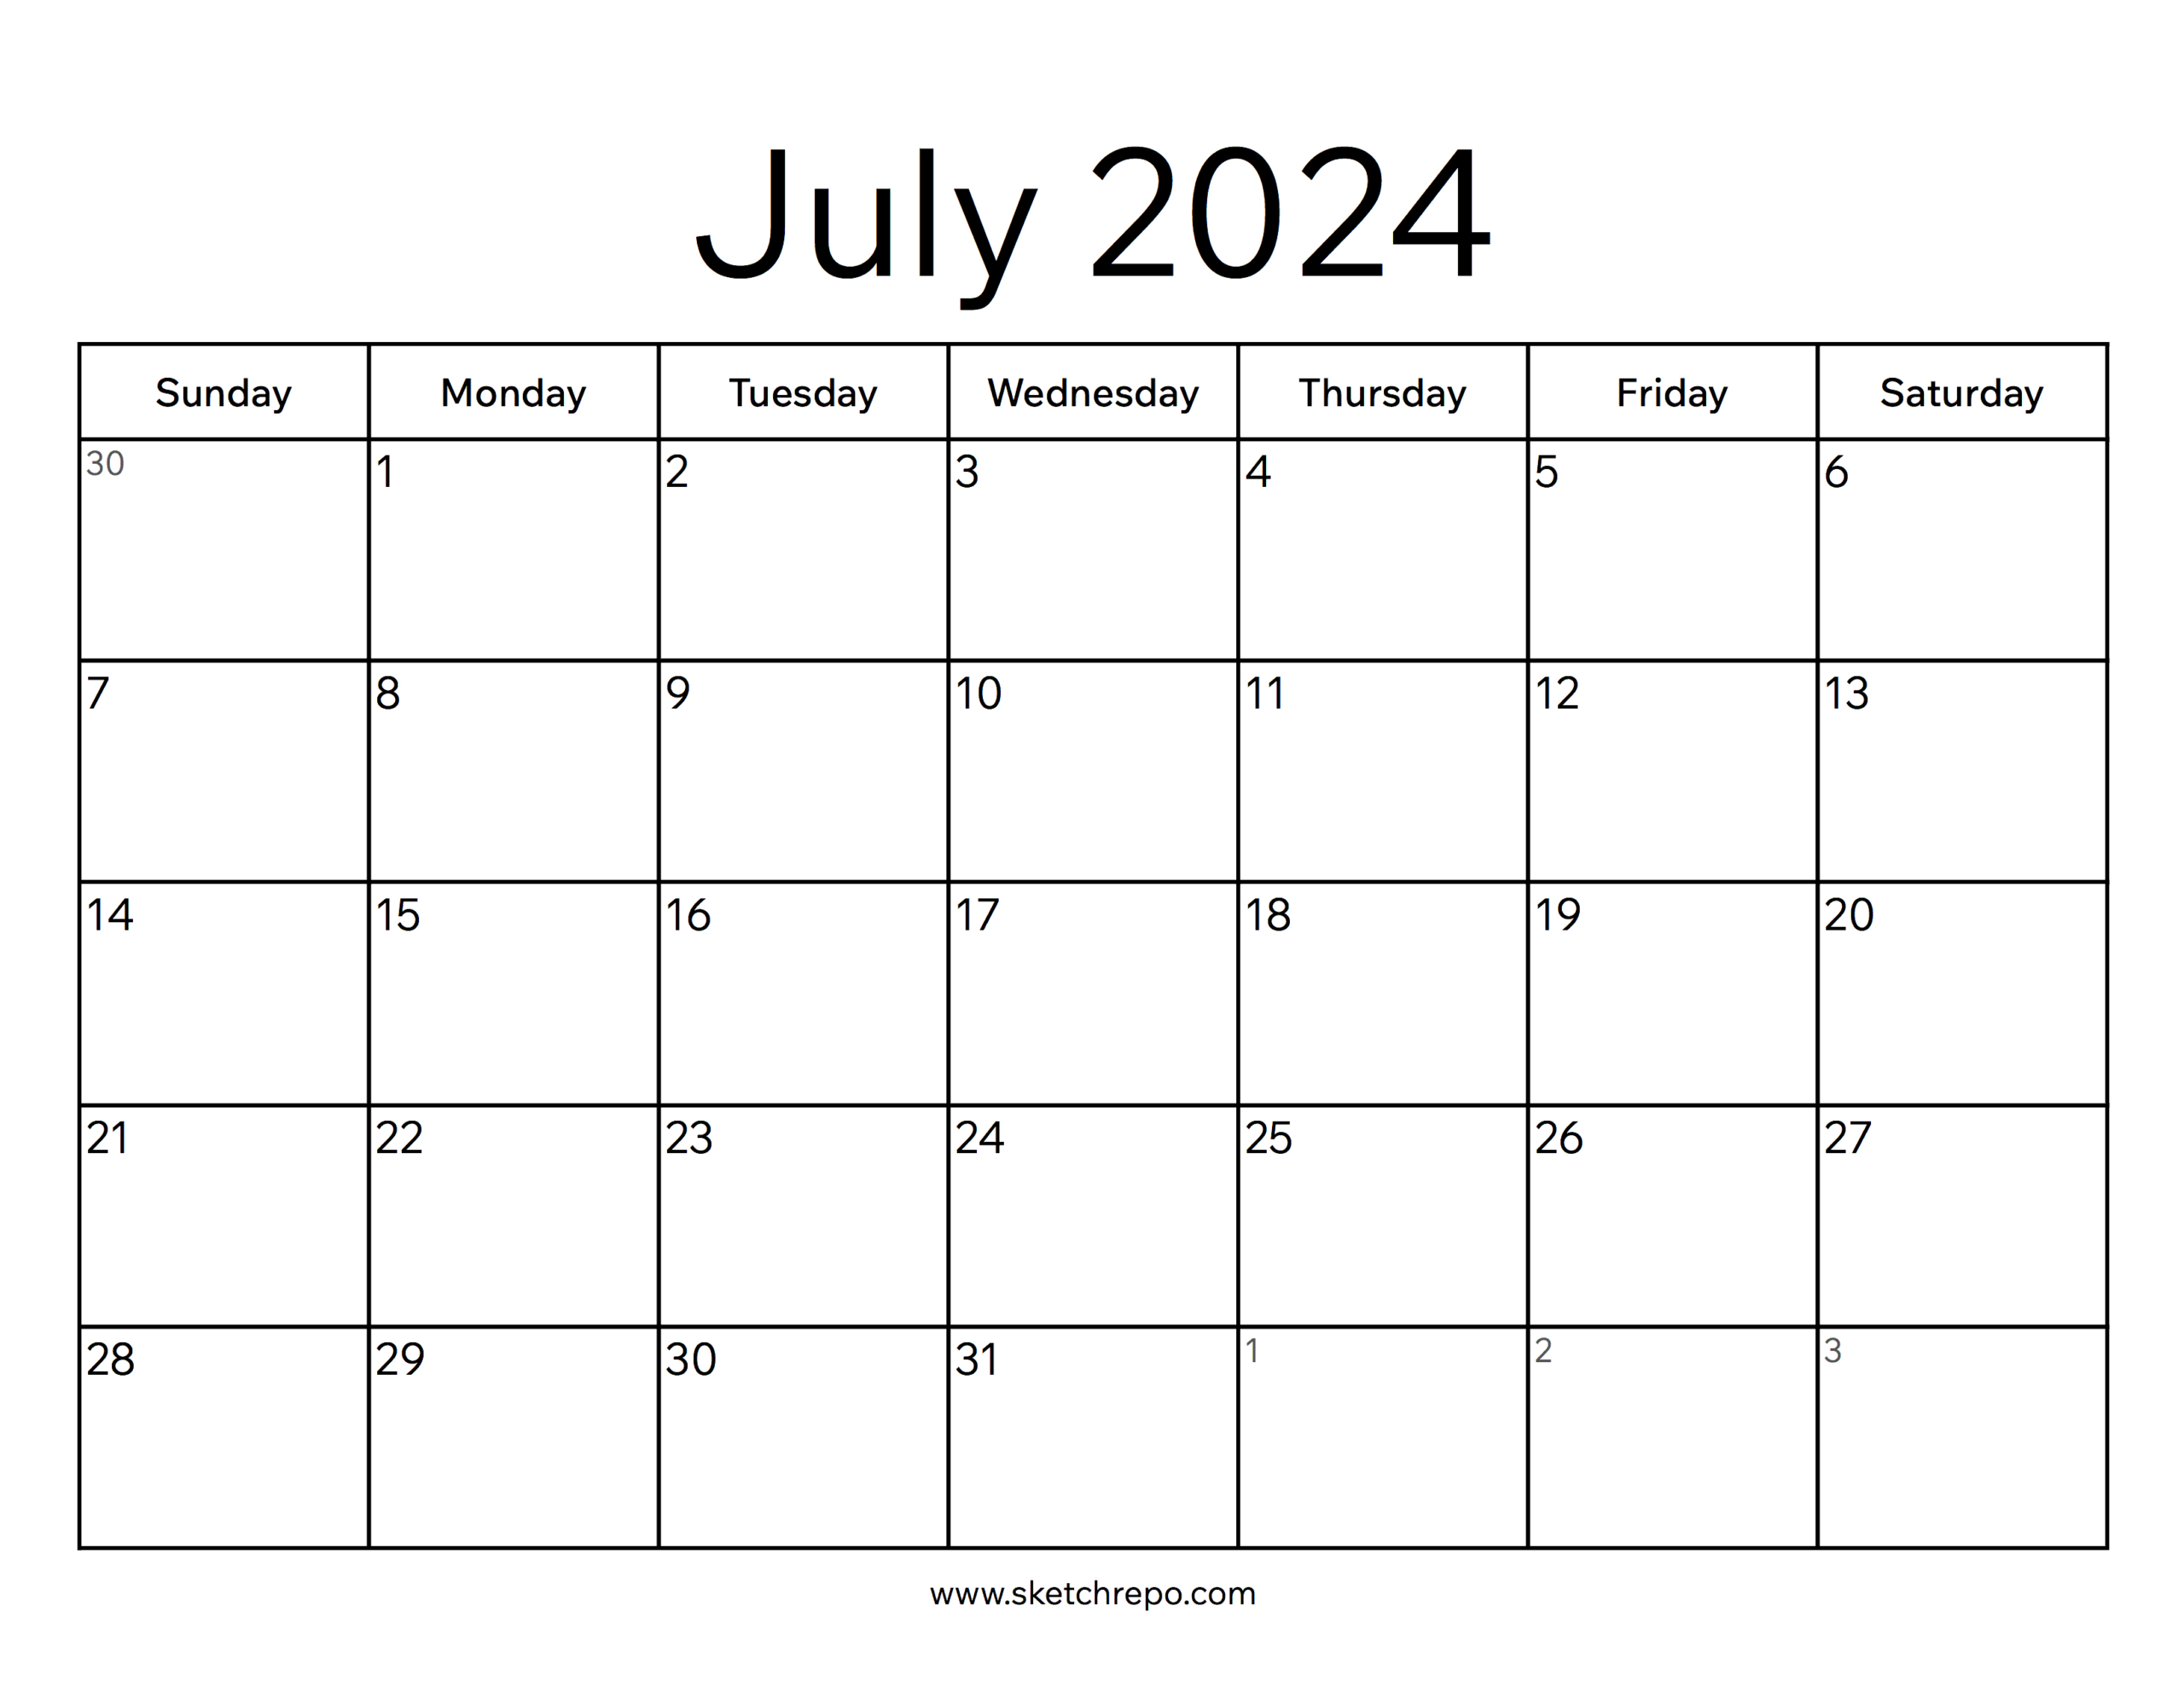 July 2024 Calendar – Sketch Repo | Give Me A Calendar For July 2024